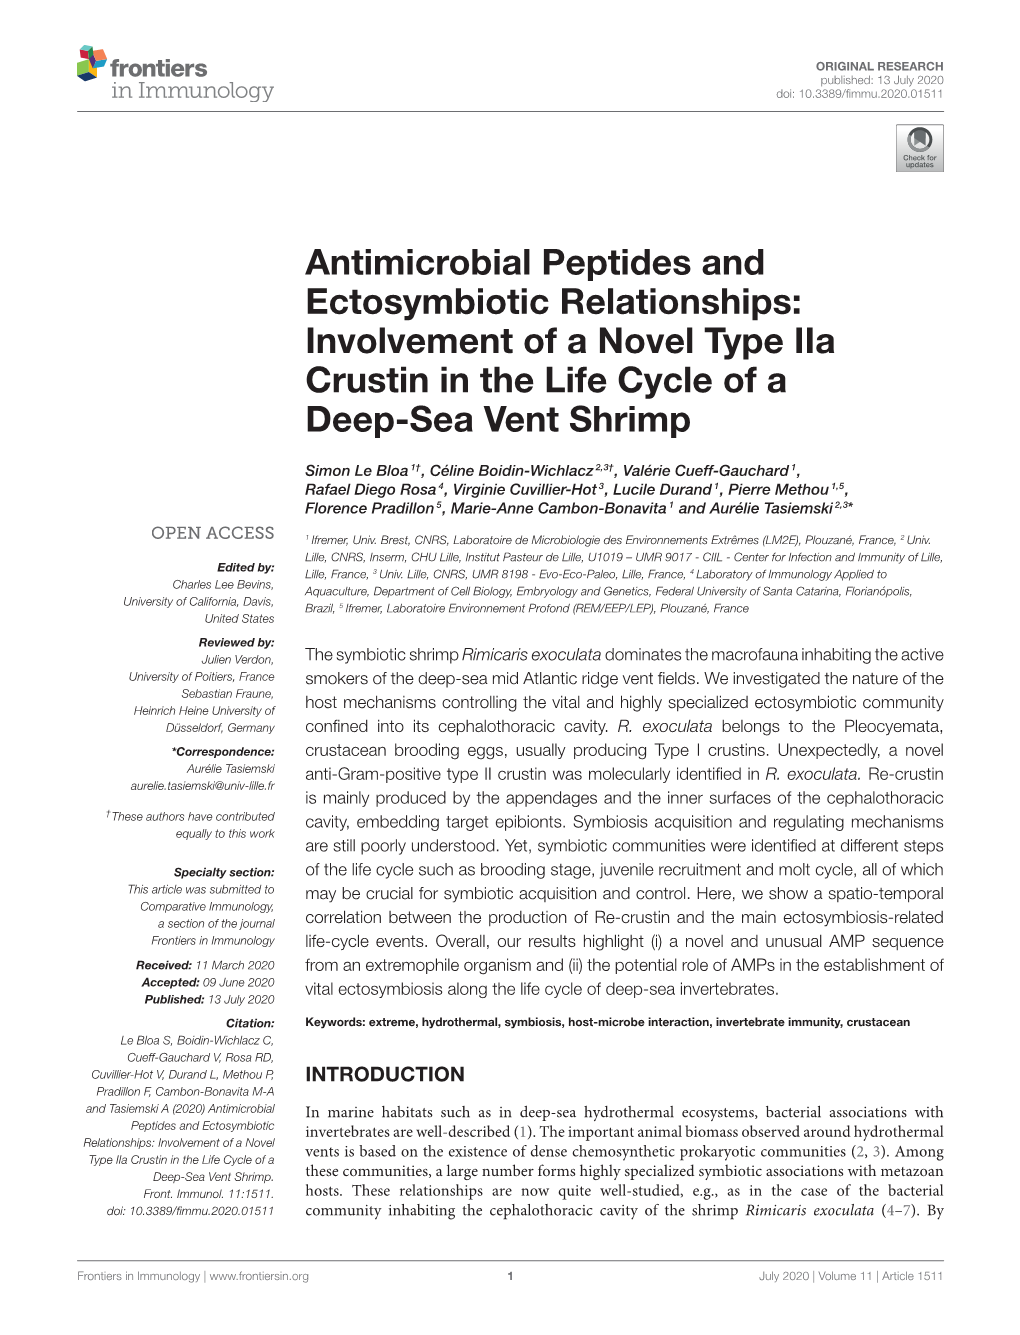 Antimicrobial Peptides and Ectosymbiotic Relationships: Involvement of a Novel Type Iia Crustin in the Life Cycle of a Deep-Sea Vent Shrimp